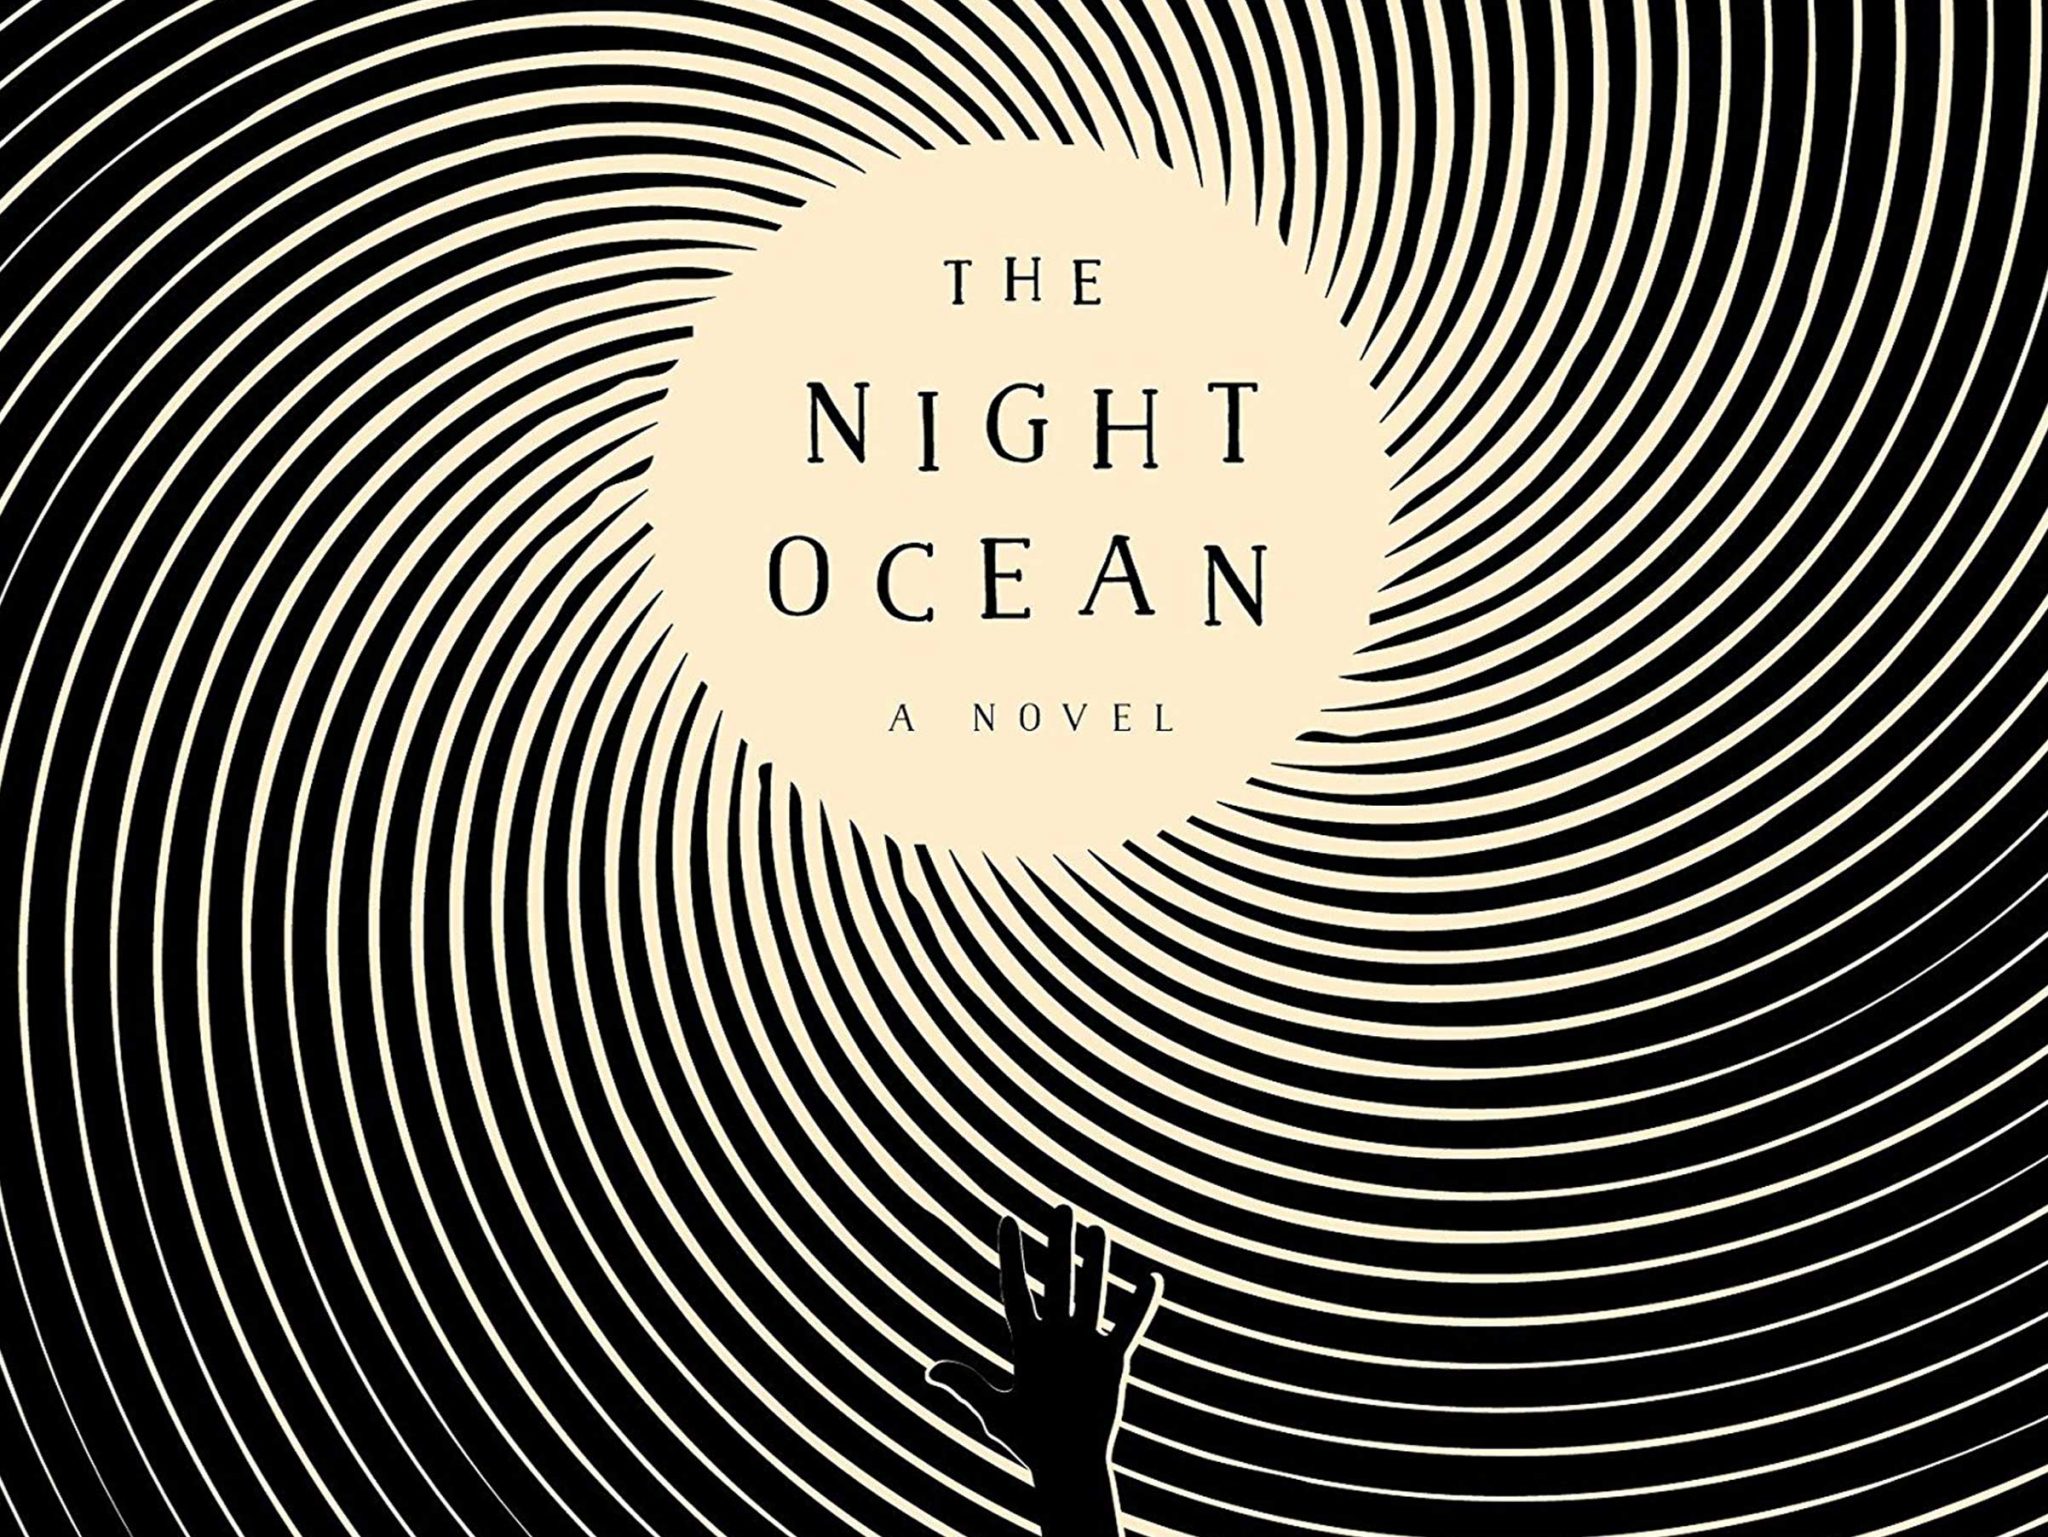 A Reading from The Night Ocean - American Academy